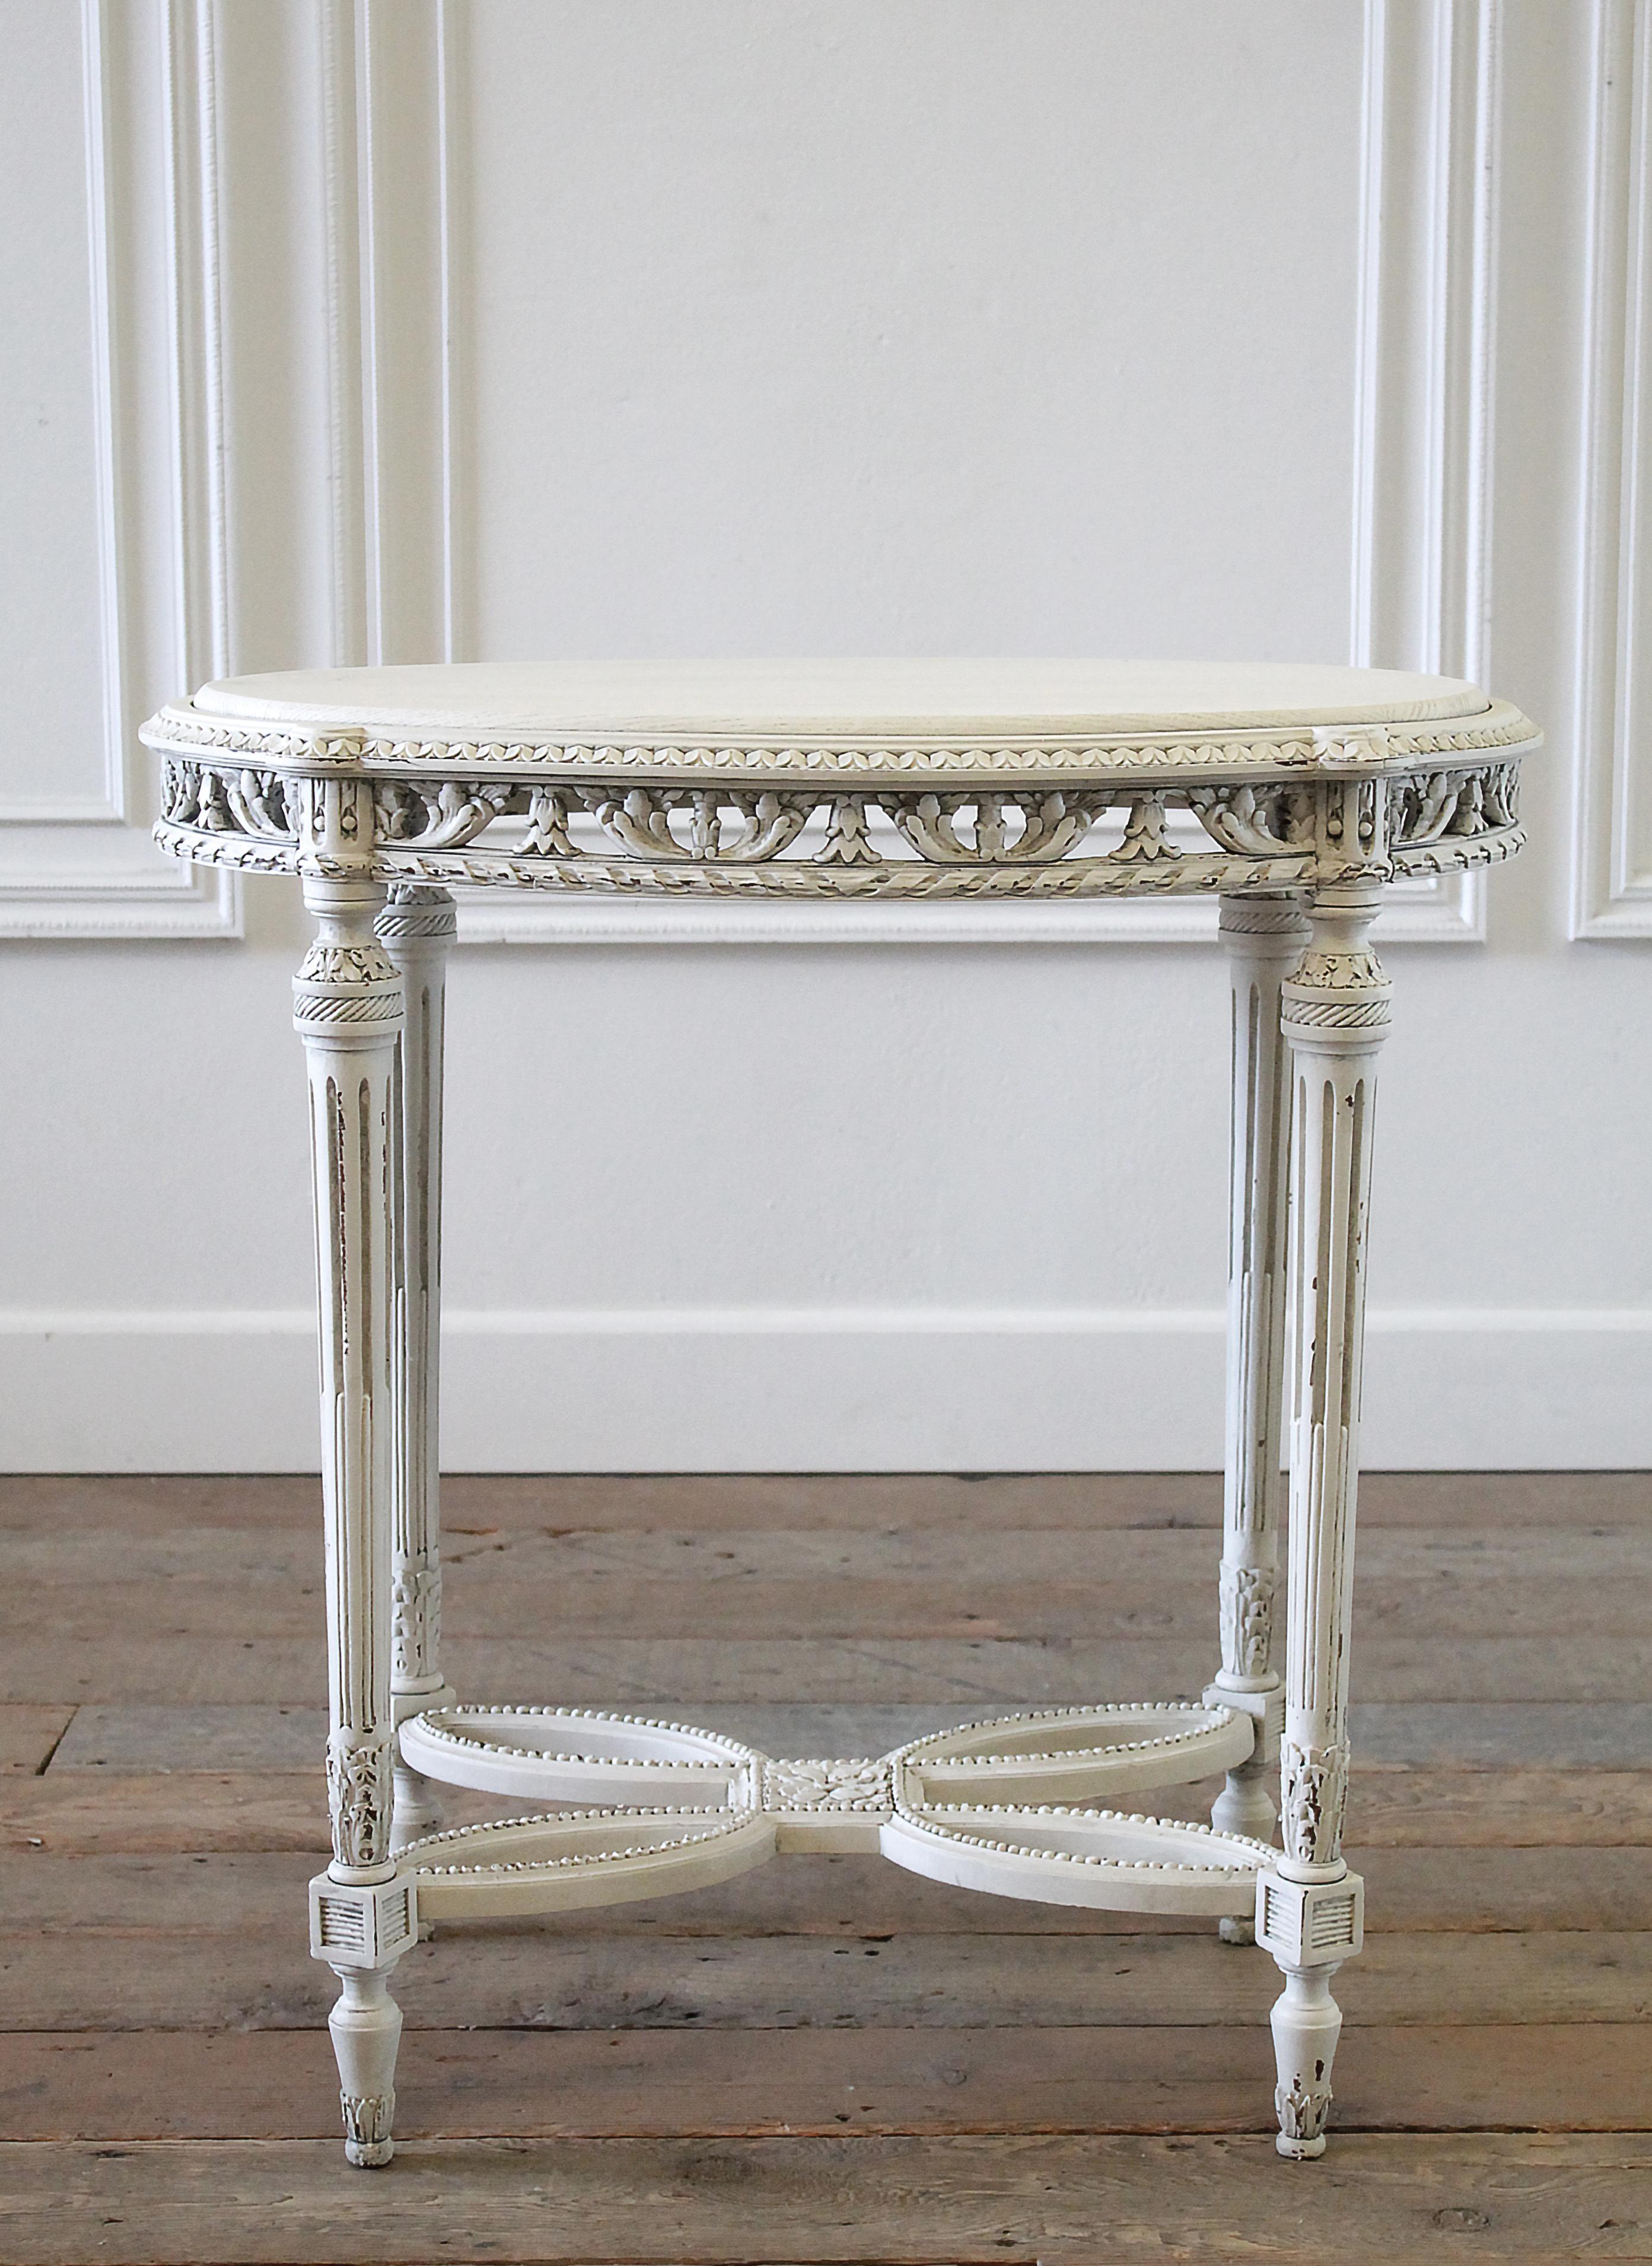 20th century painted oak carved side table in the Louis XVI style.
Painted in a soft white color, with subtle distressed edges, and finished with an antique glazed patina. Legs and base are sturdy, can be used for everyday. Fluted carved legs, with